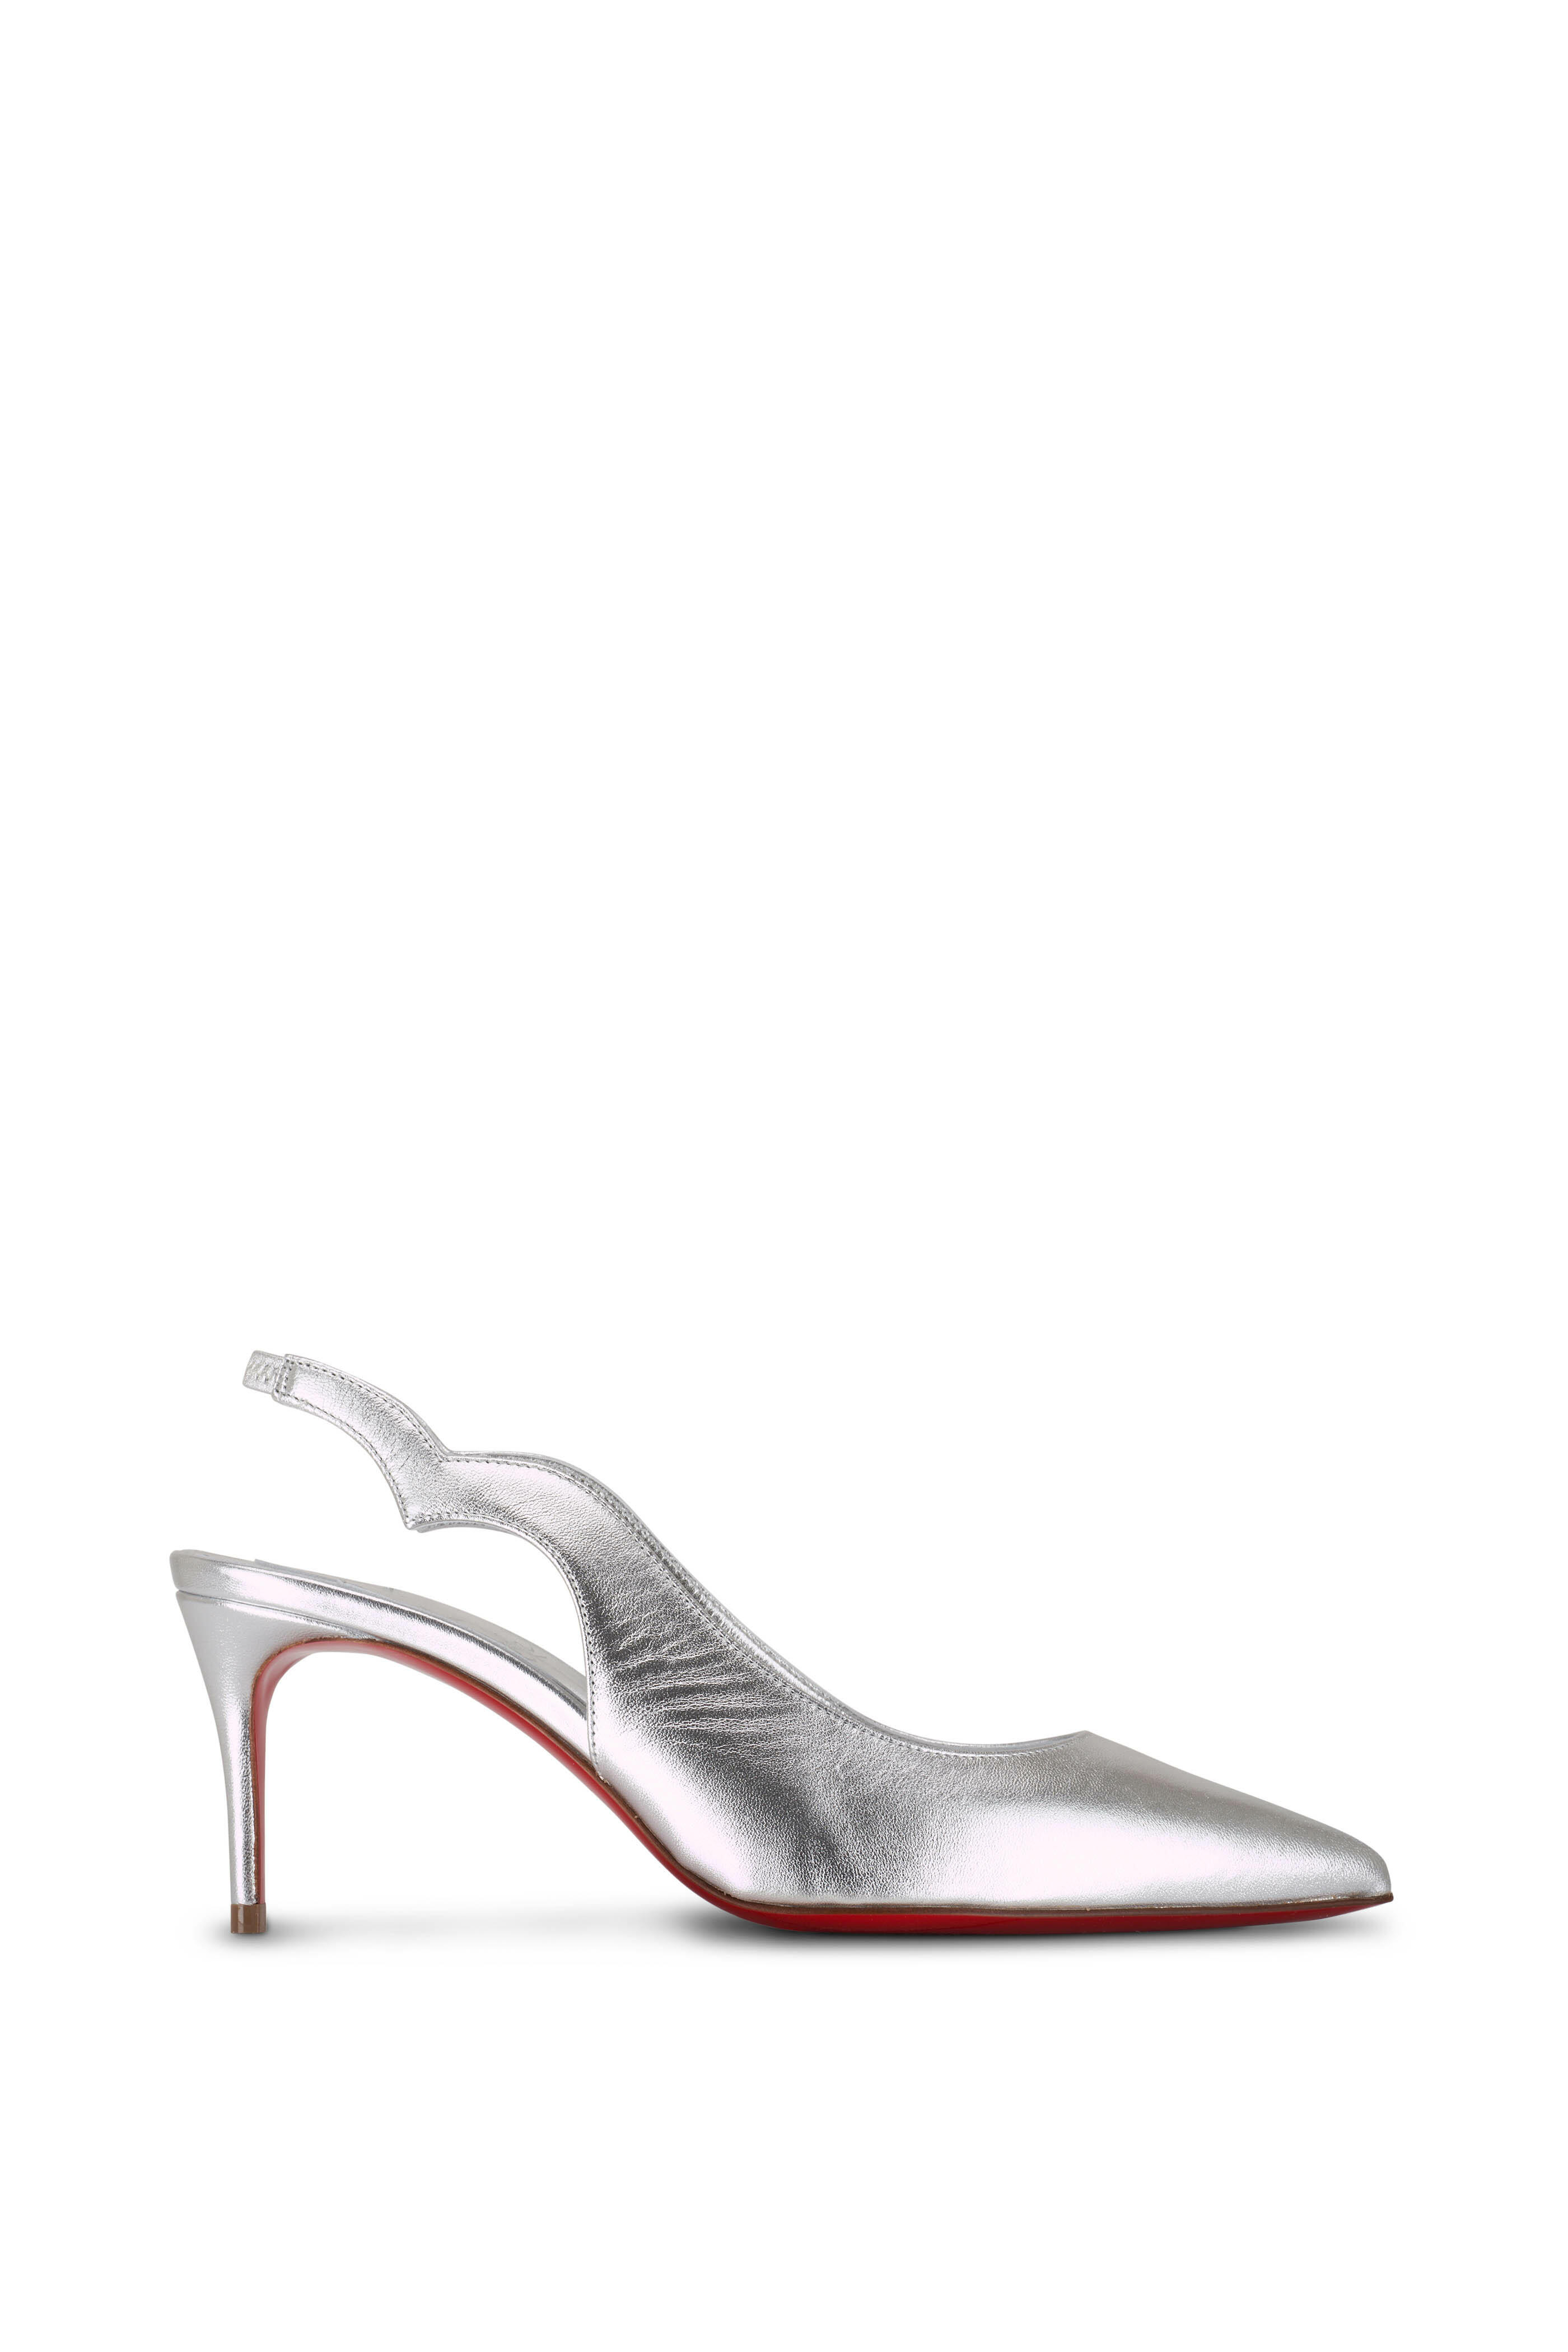 CHRISTIAN LOUBOUTIN Hot Chick Sling patent-leather slingback pumps